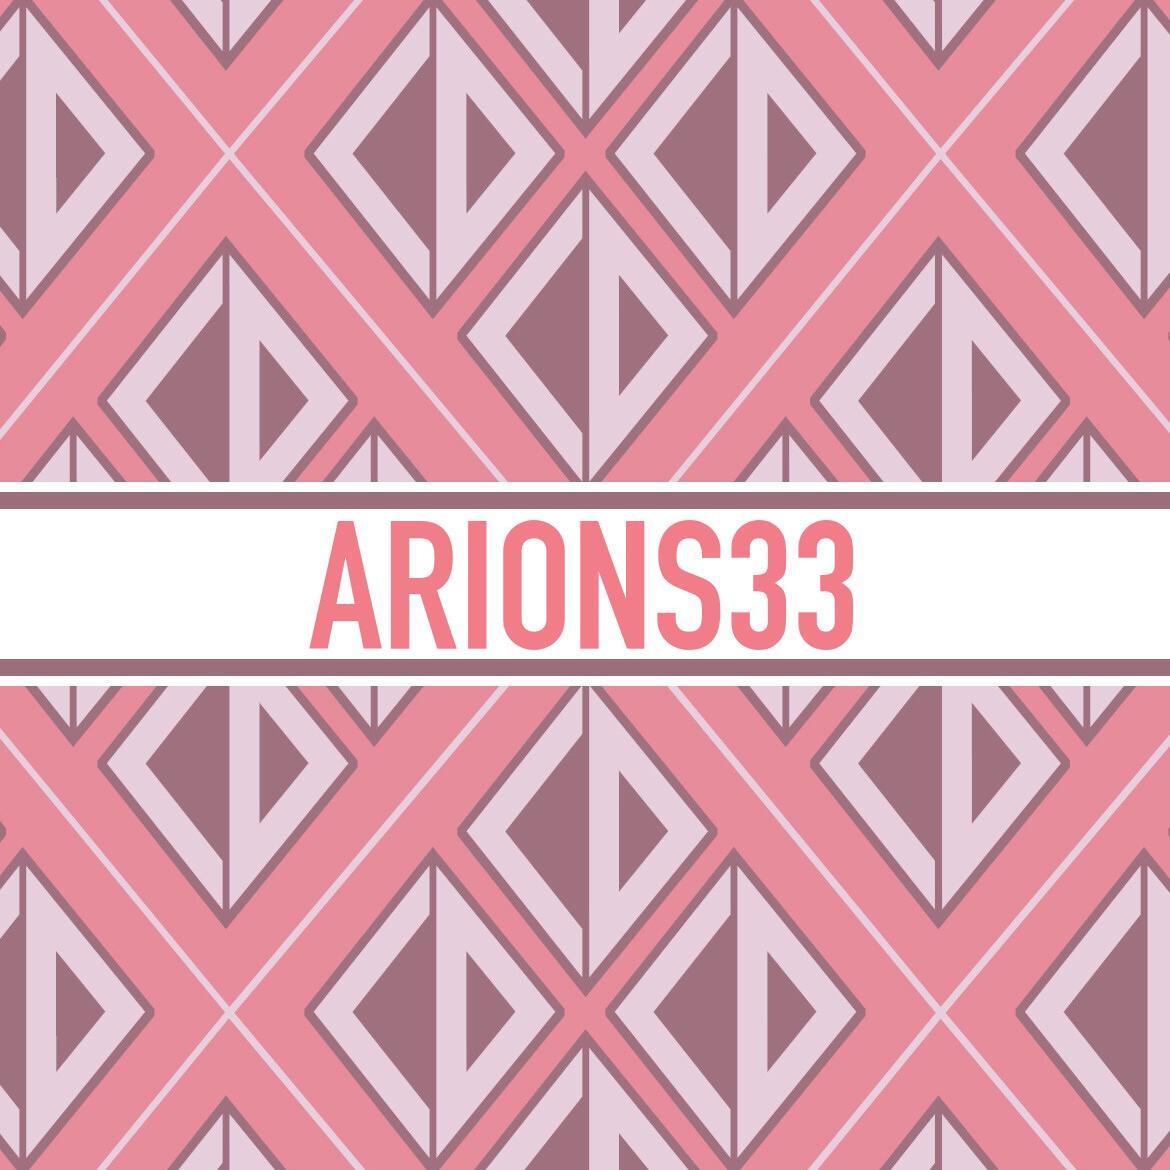 ARIONS